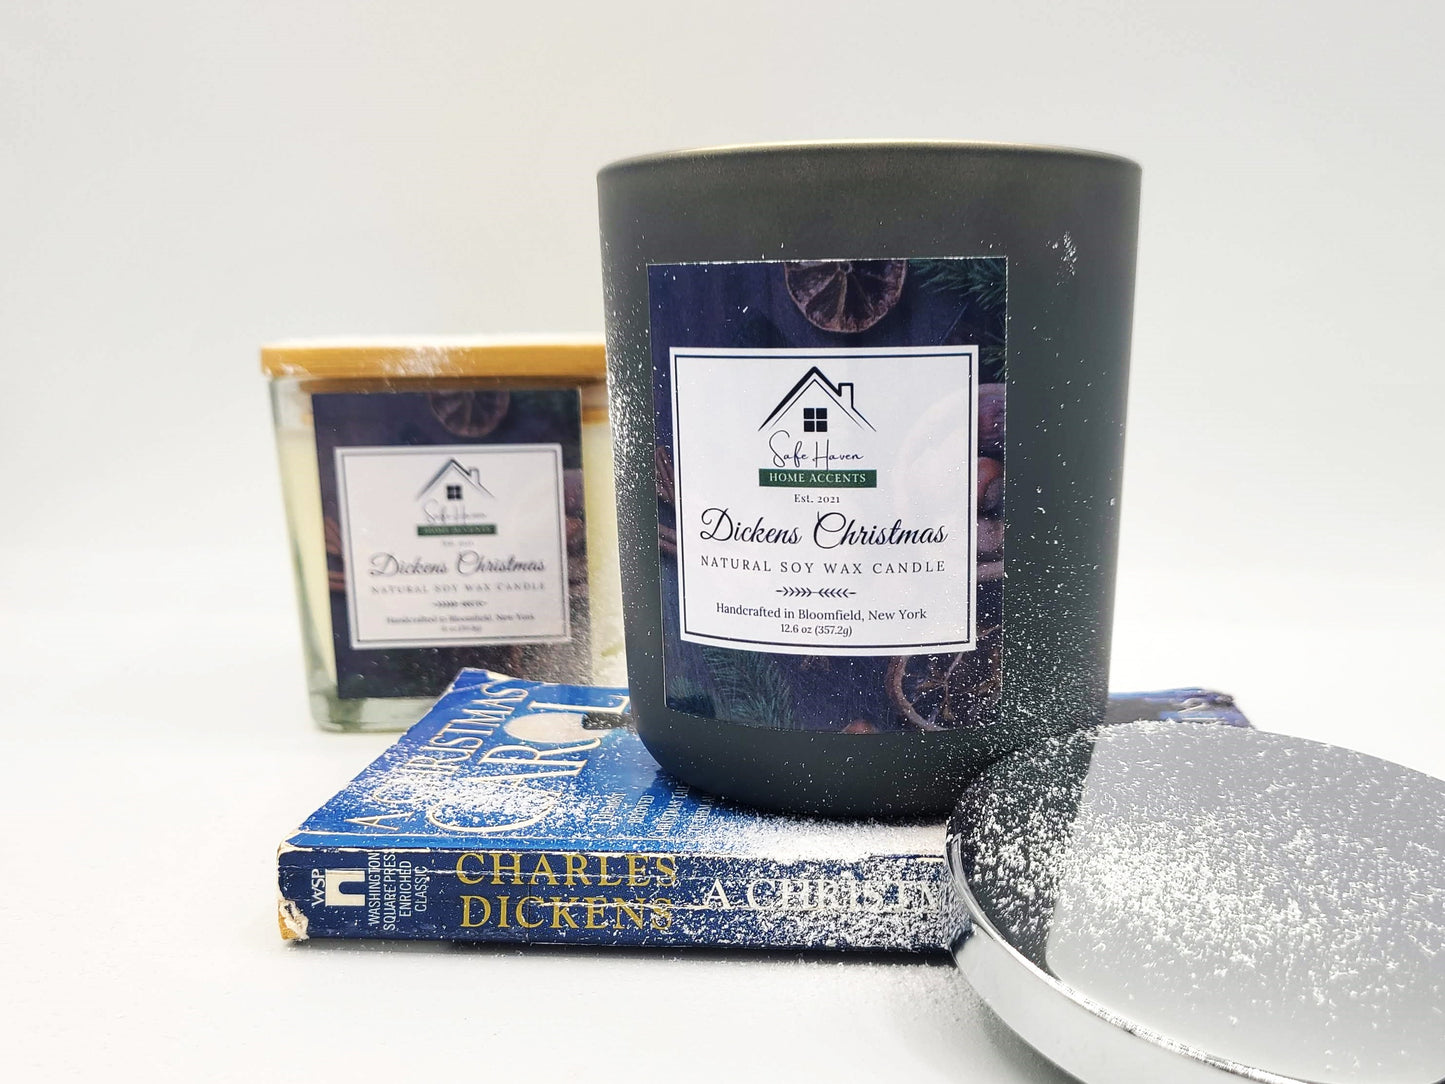 Dickens Christmas Natural Soy Wax Candle